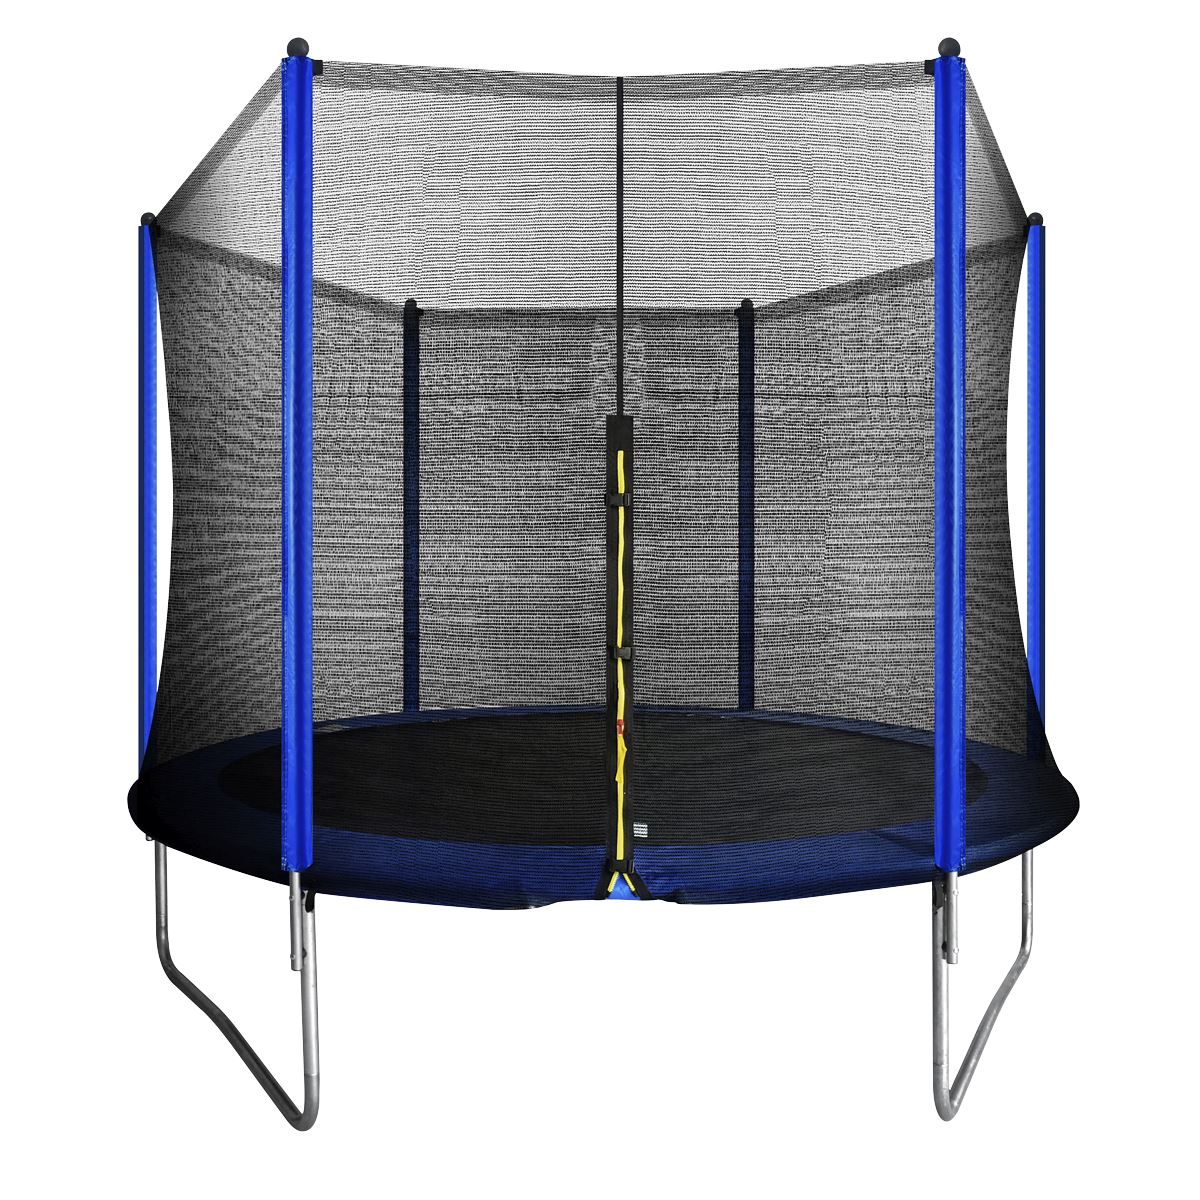 Dellonda 10ft Heavy-Duty Outdoor Trampoline with Safety Enclosure Net